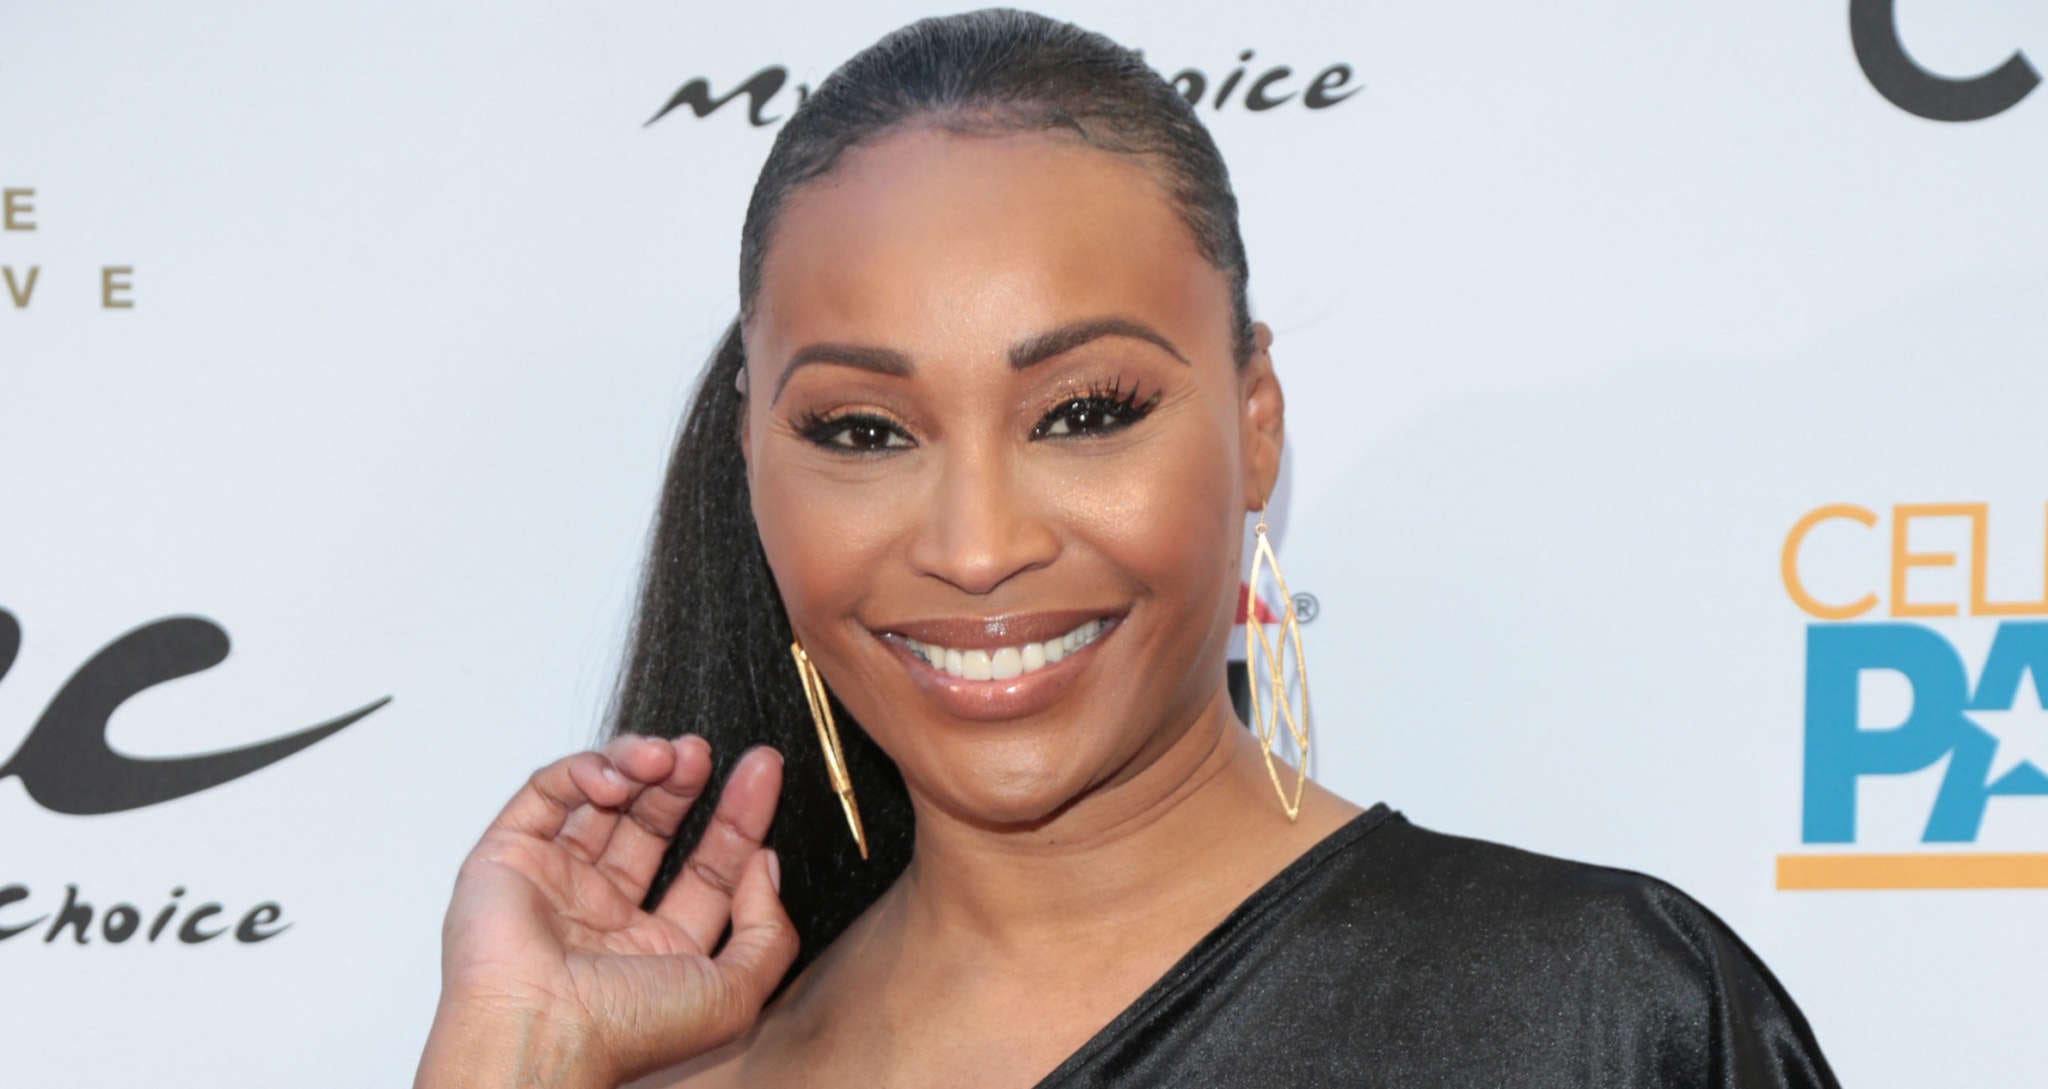 Cynthia Bailey Uses Her Platform To Raise Awareness About An Important